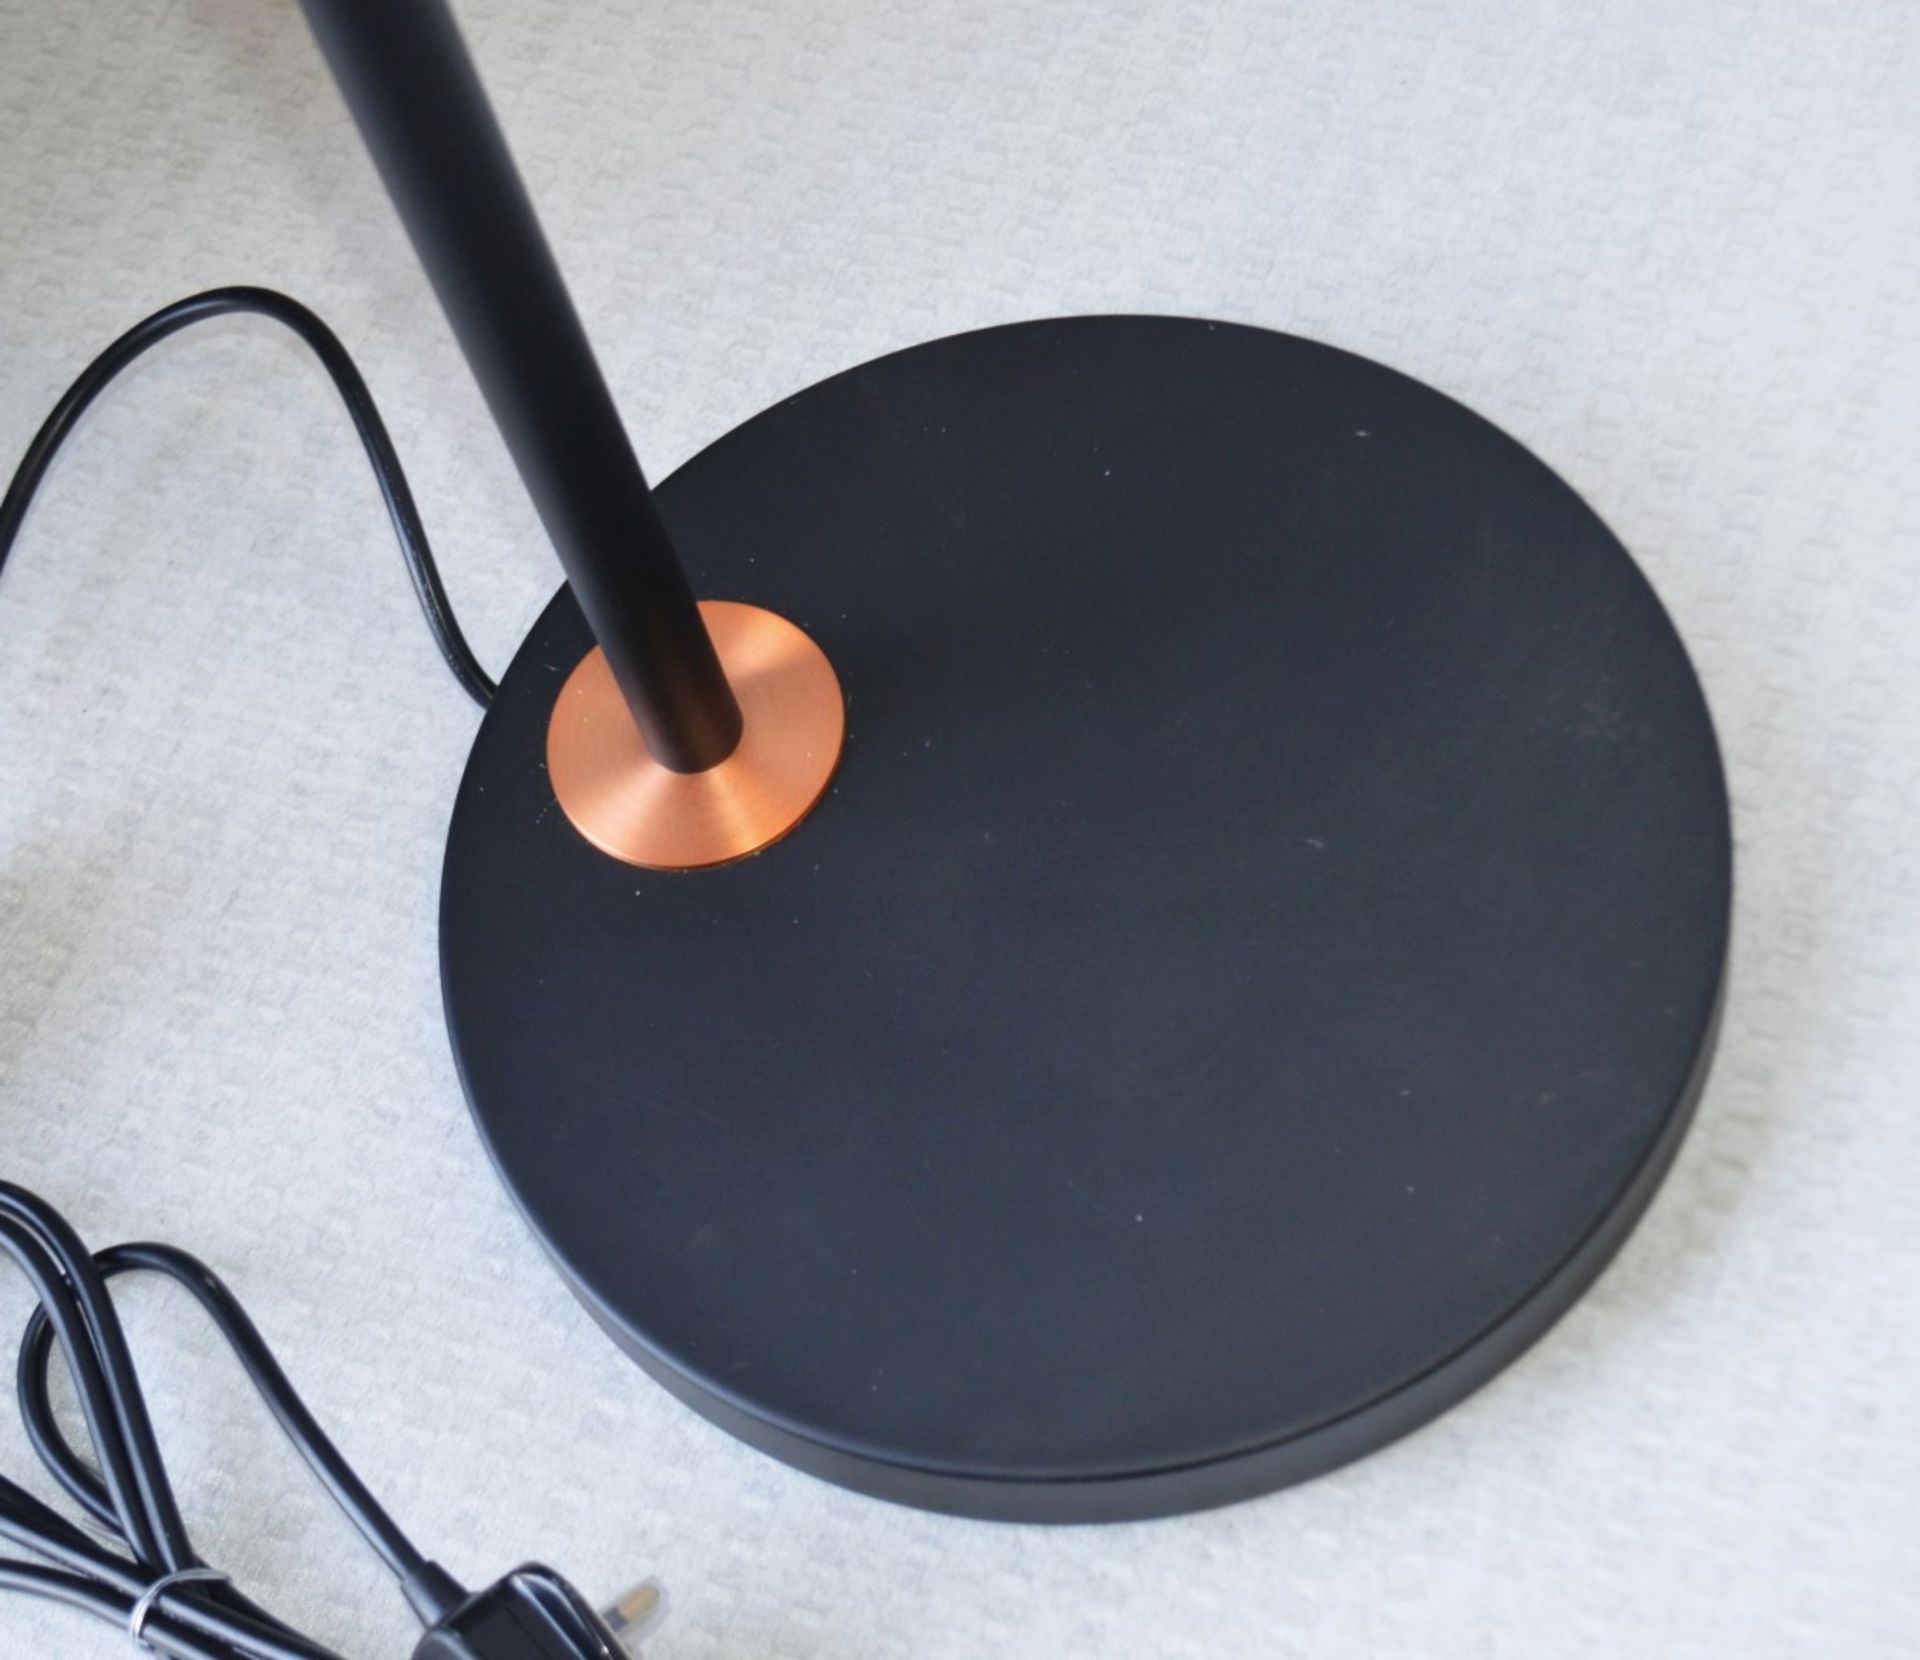 1 x CHELSOM Modernist Floor Lamp In A Matt Black Finish With Copper Accents - Unused Boxed Stock - Image 3 of 8